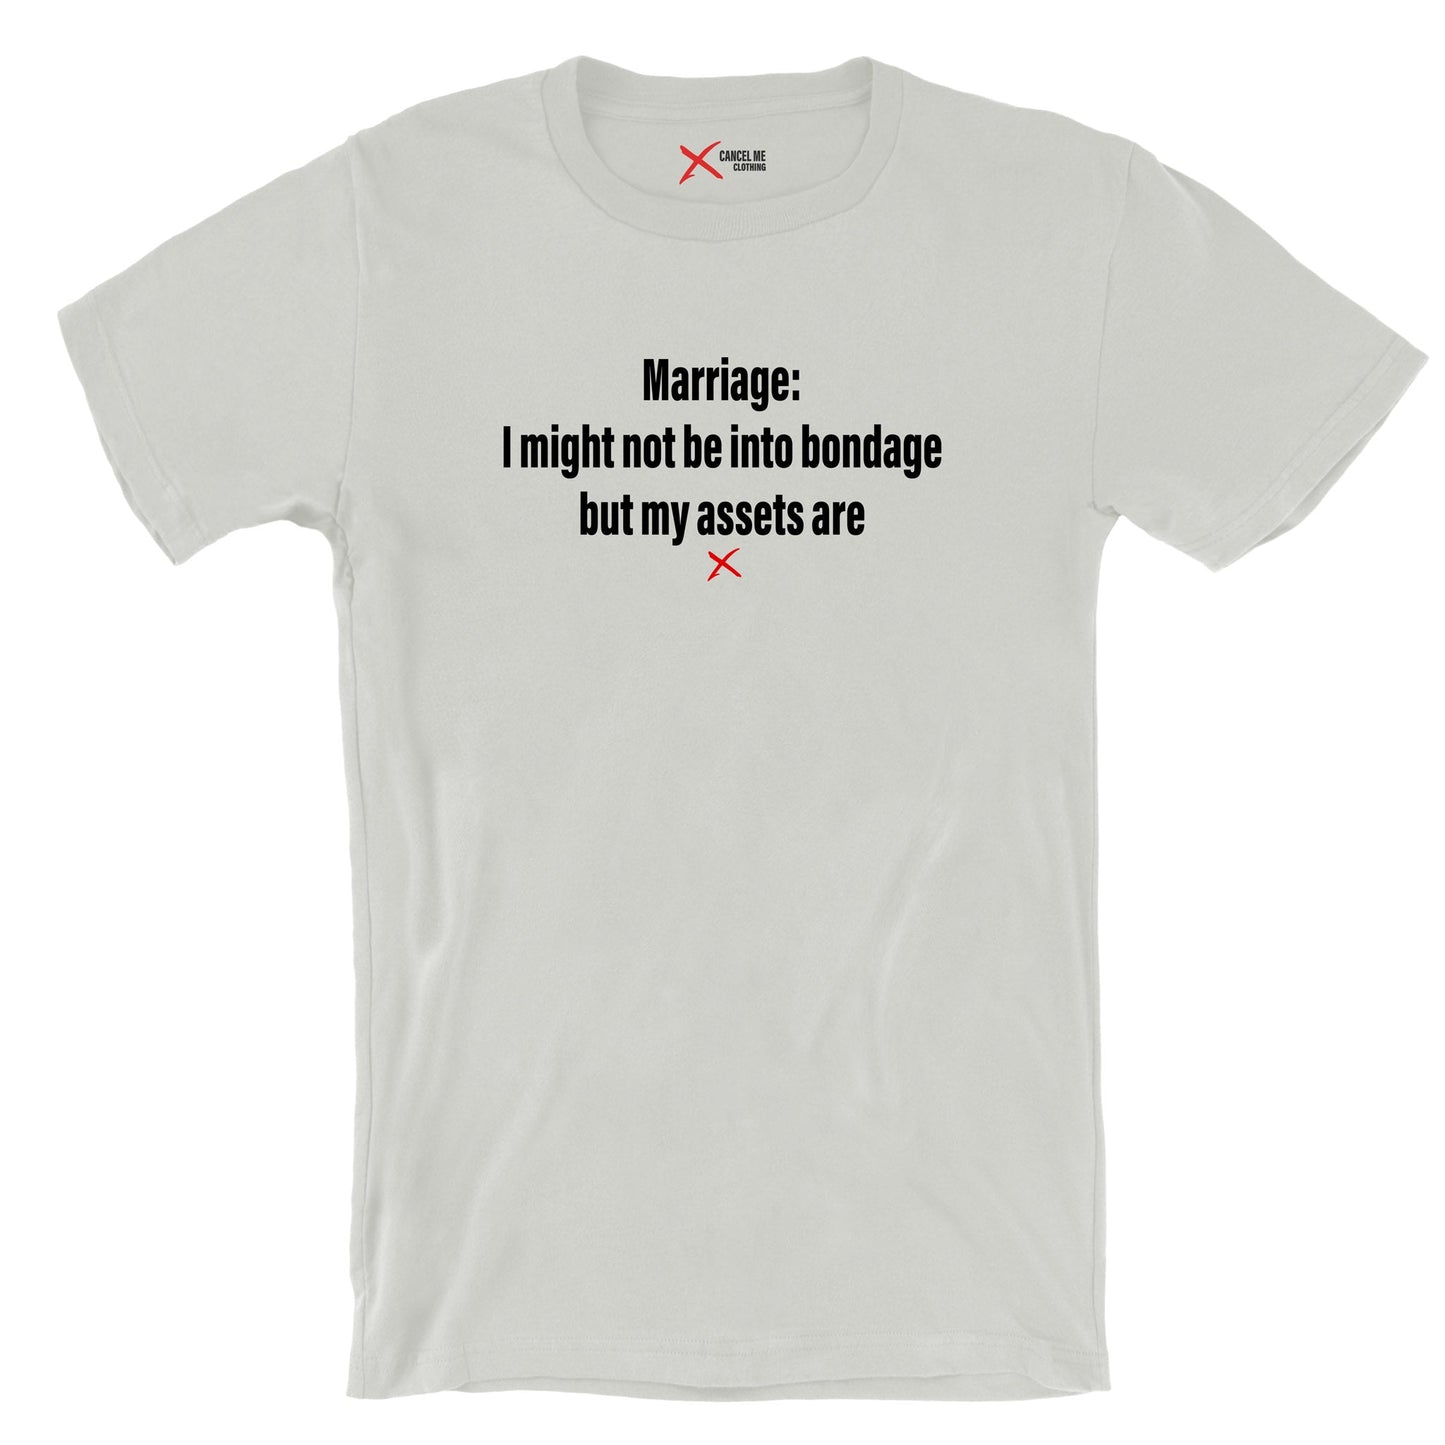 Marriage: I might not be into bondage but my assets are - Shirt